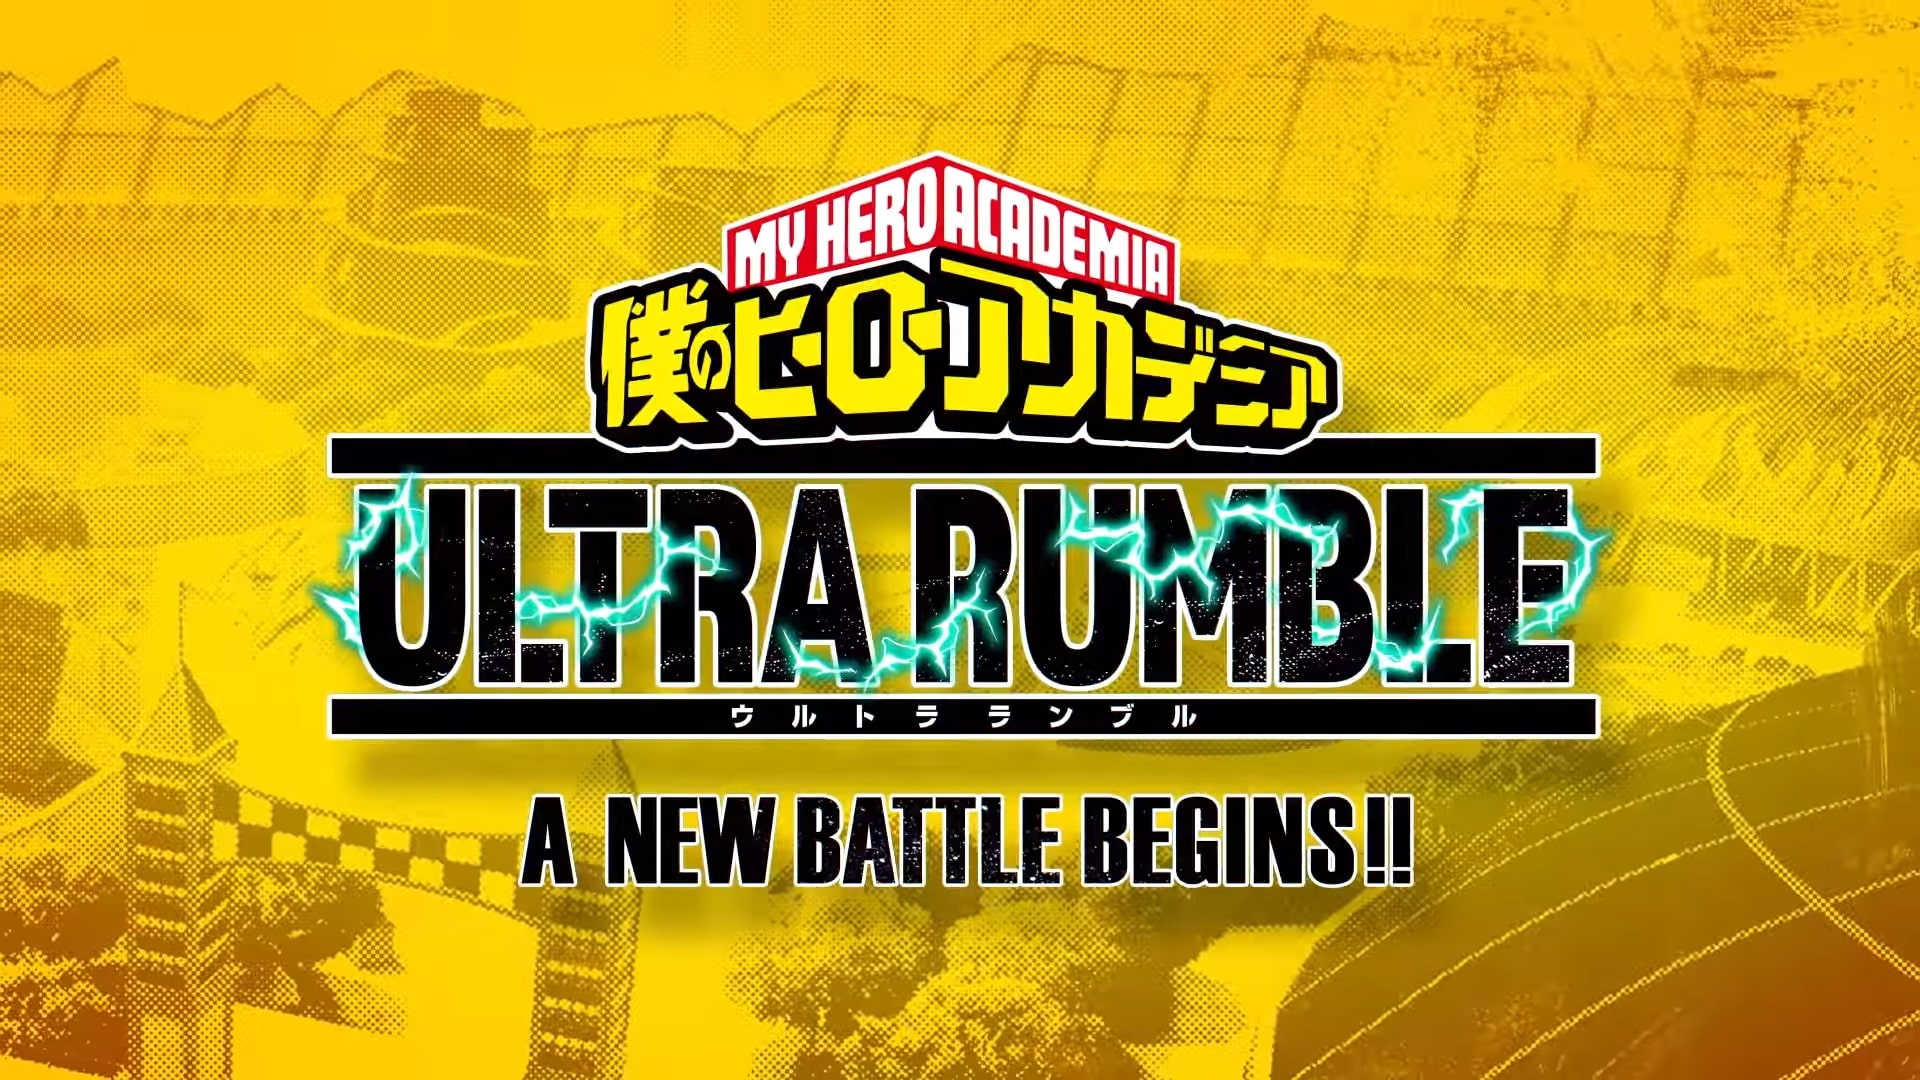 My Hero Academia Is Getting a Battle Royale Game This Year; Closed Beta Coming Soon (Oh No)